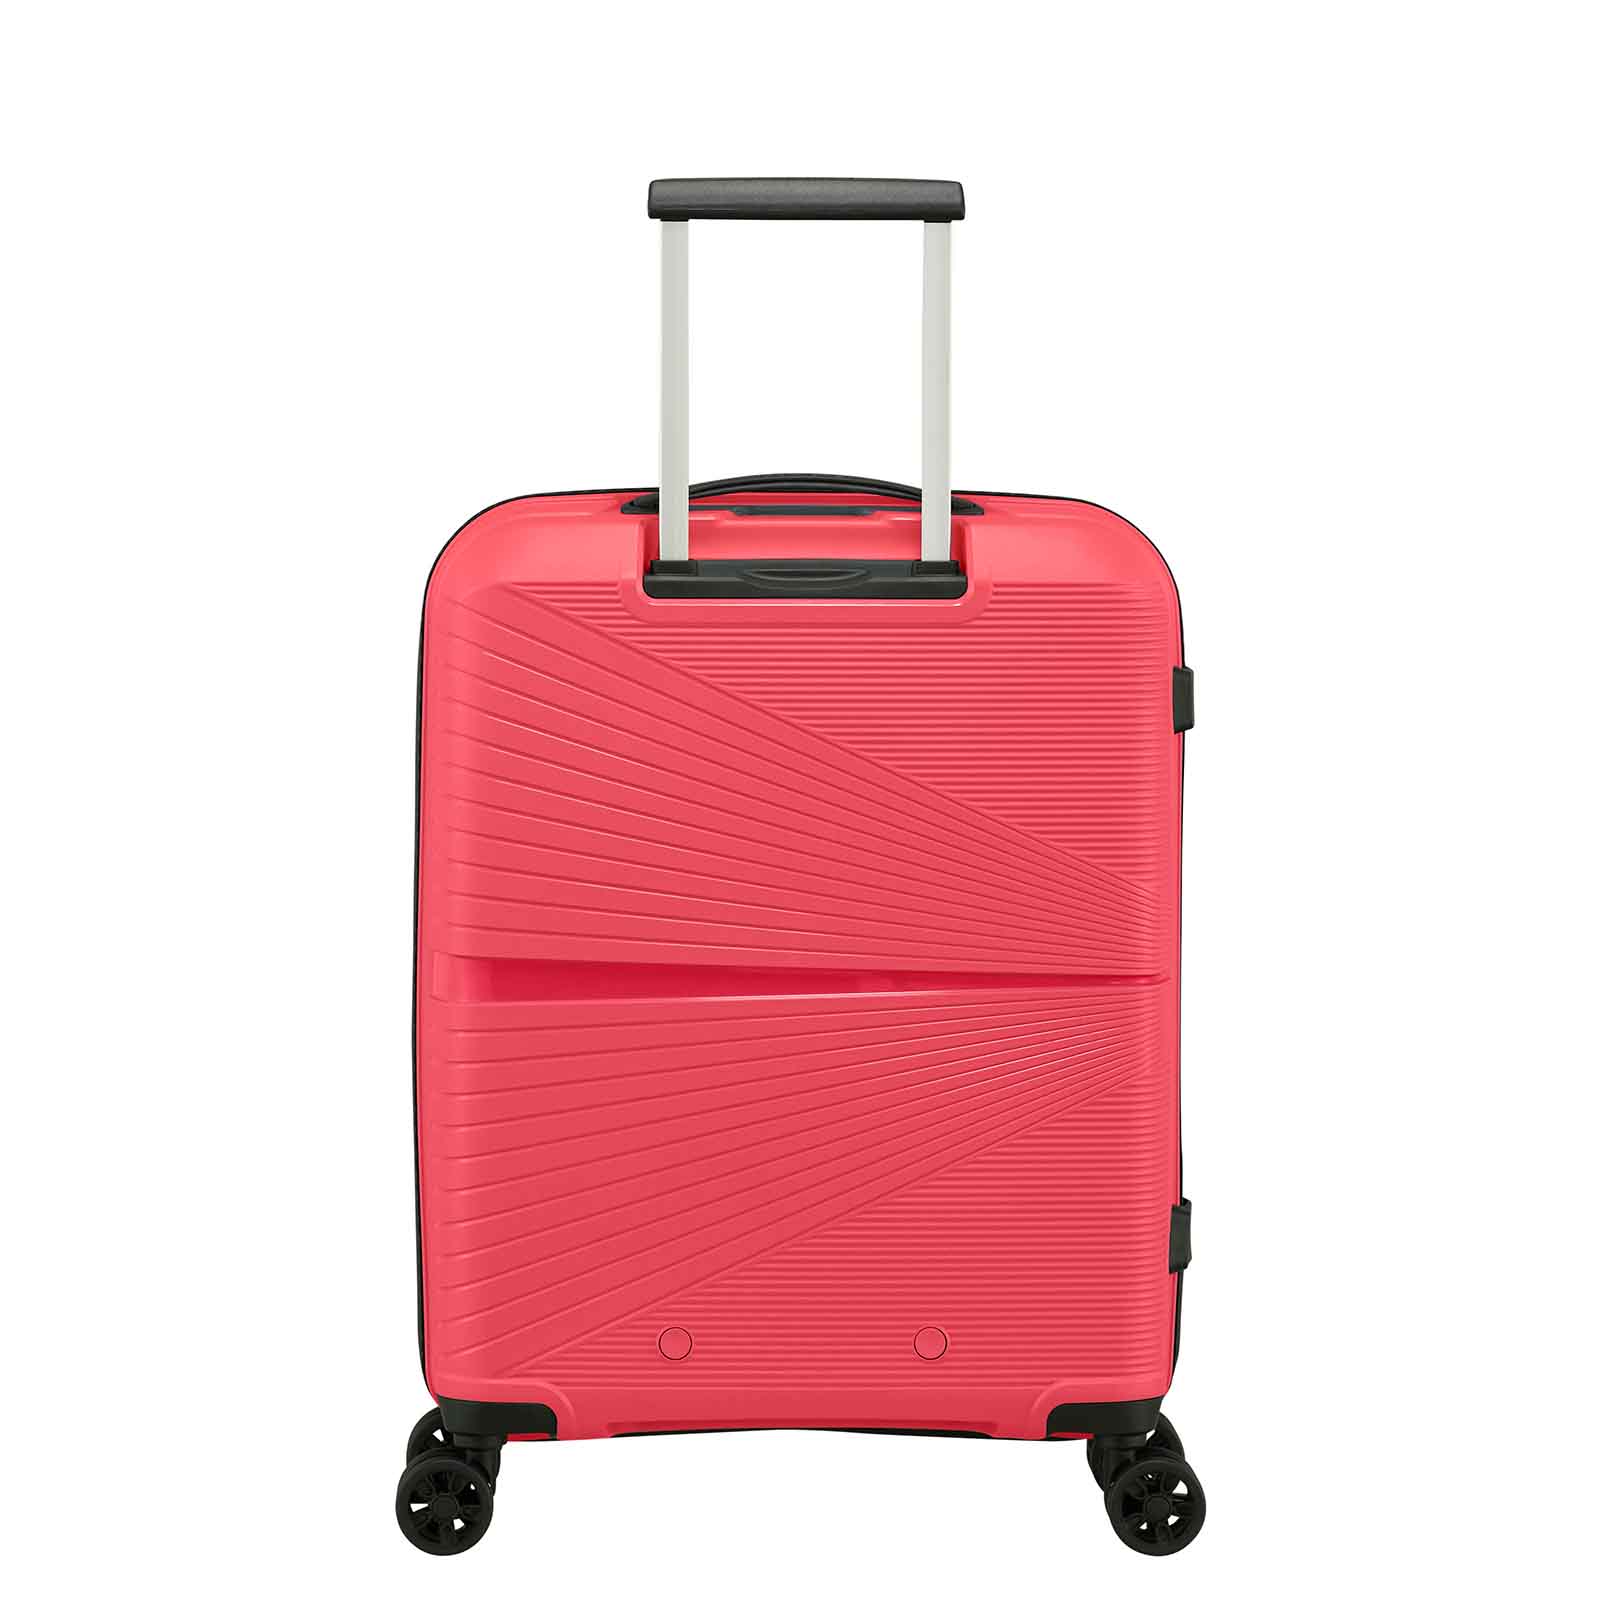 American Tourister Airconic 55cm Carry-On Suitcase Paradise Pink